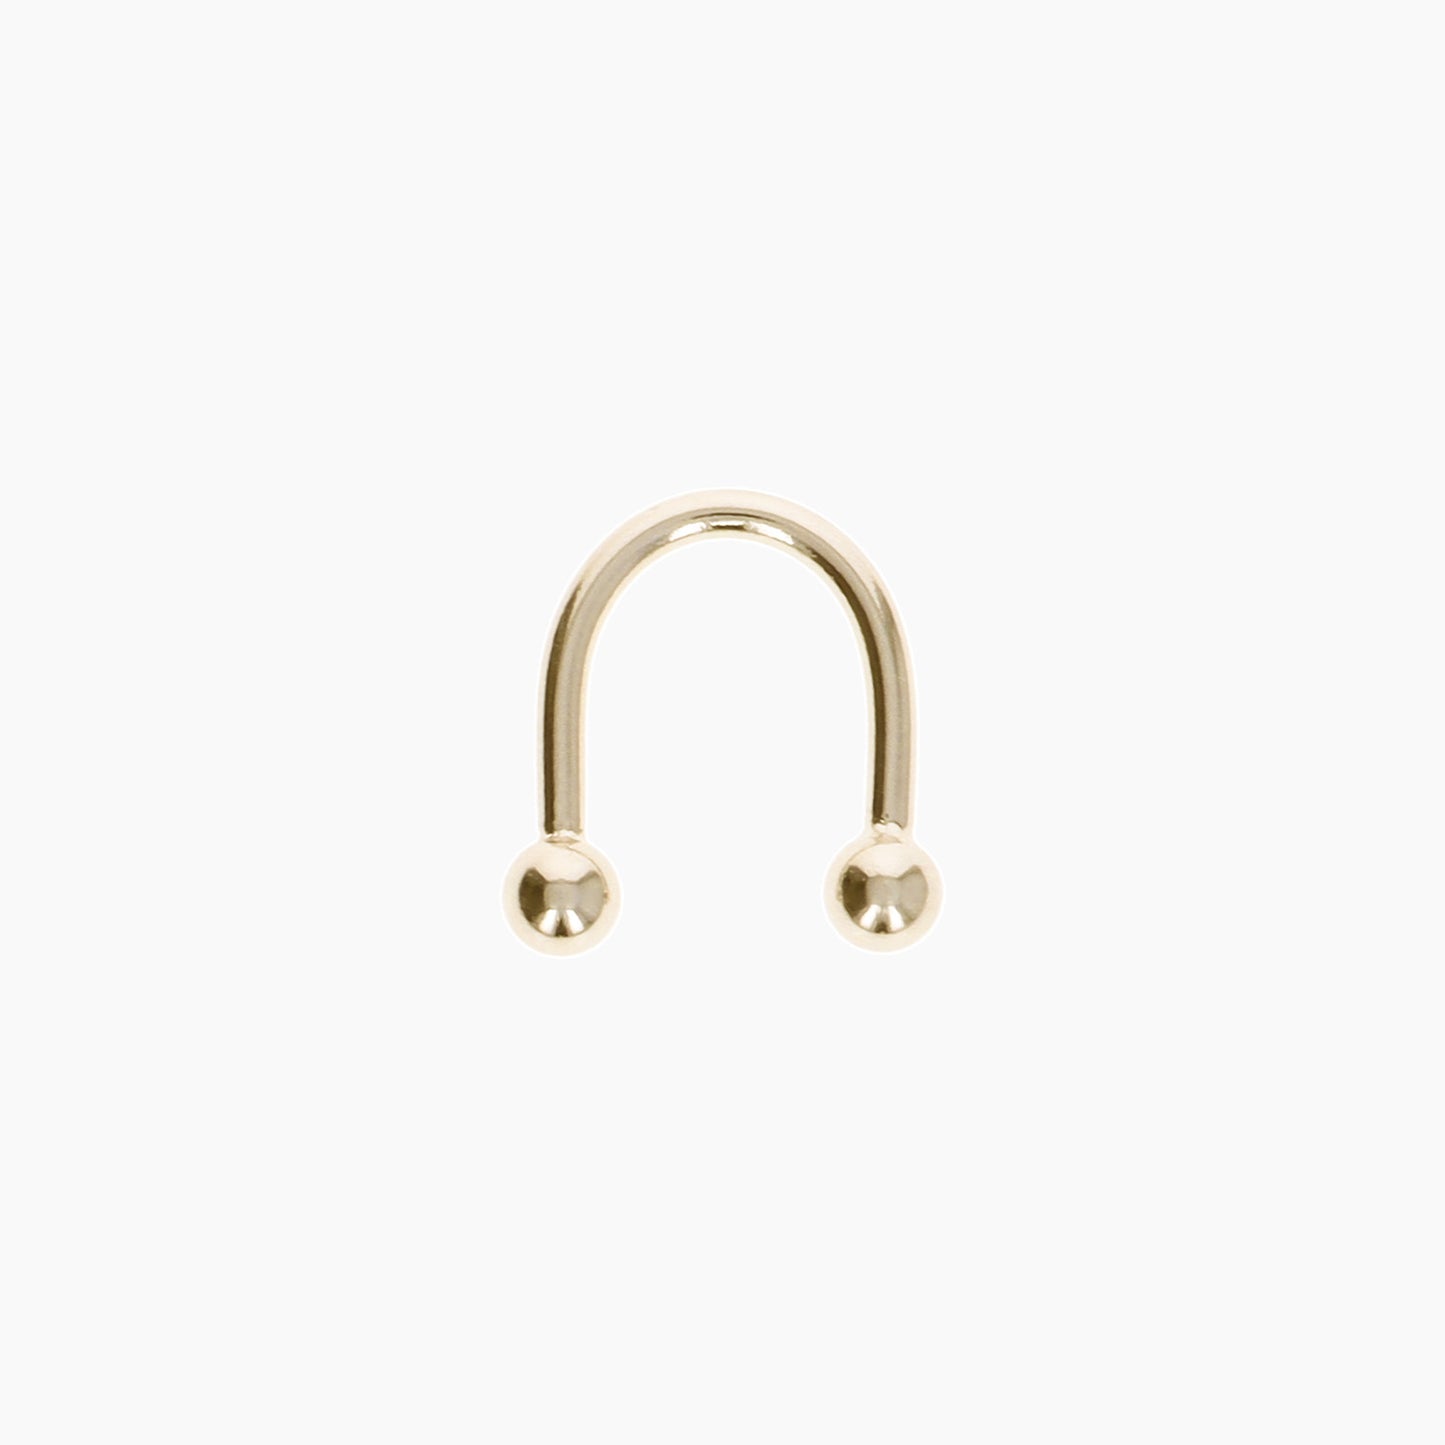 Justine Clenquet Demi Ring, Pale Gold